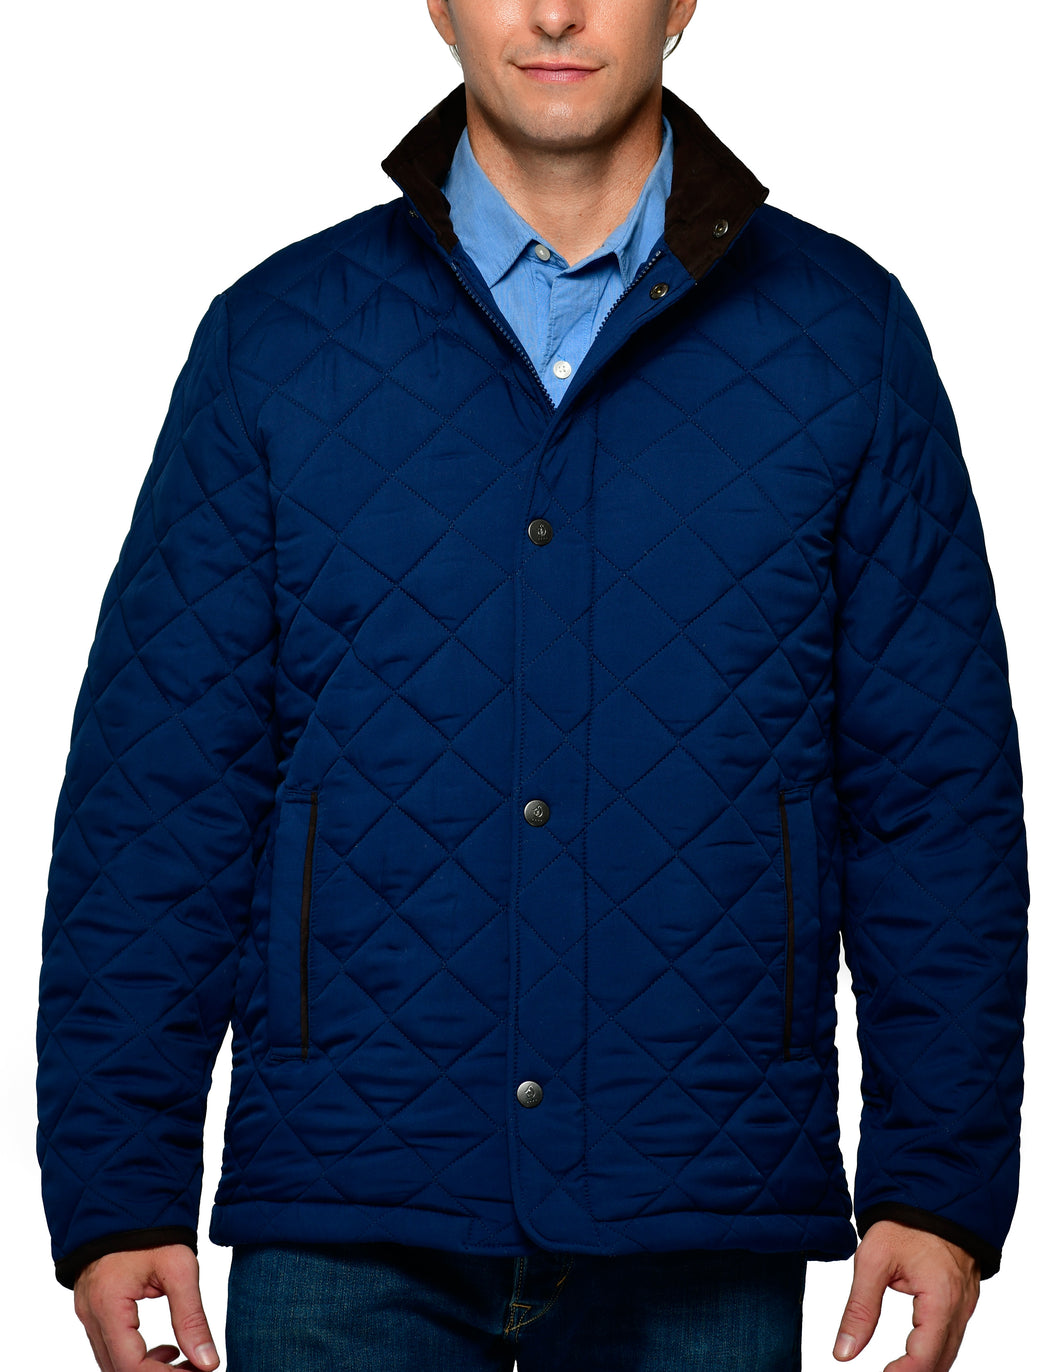 Men's Classic Diamond Quilted Hipster Car Coat - Navy